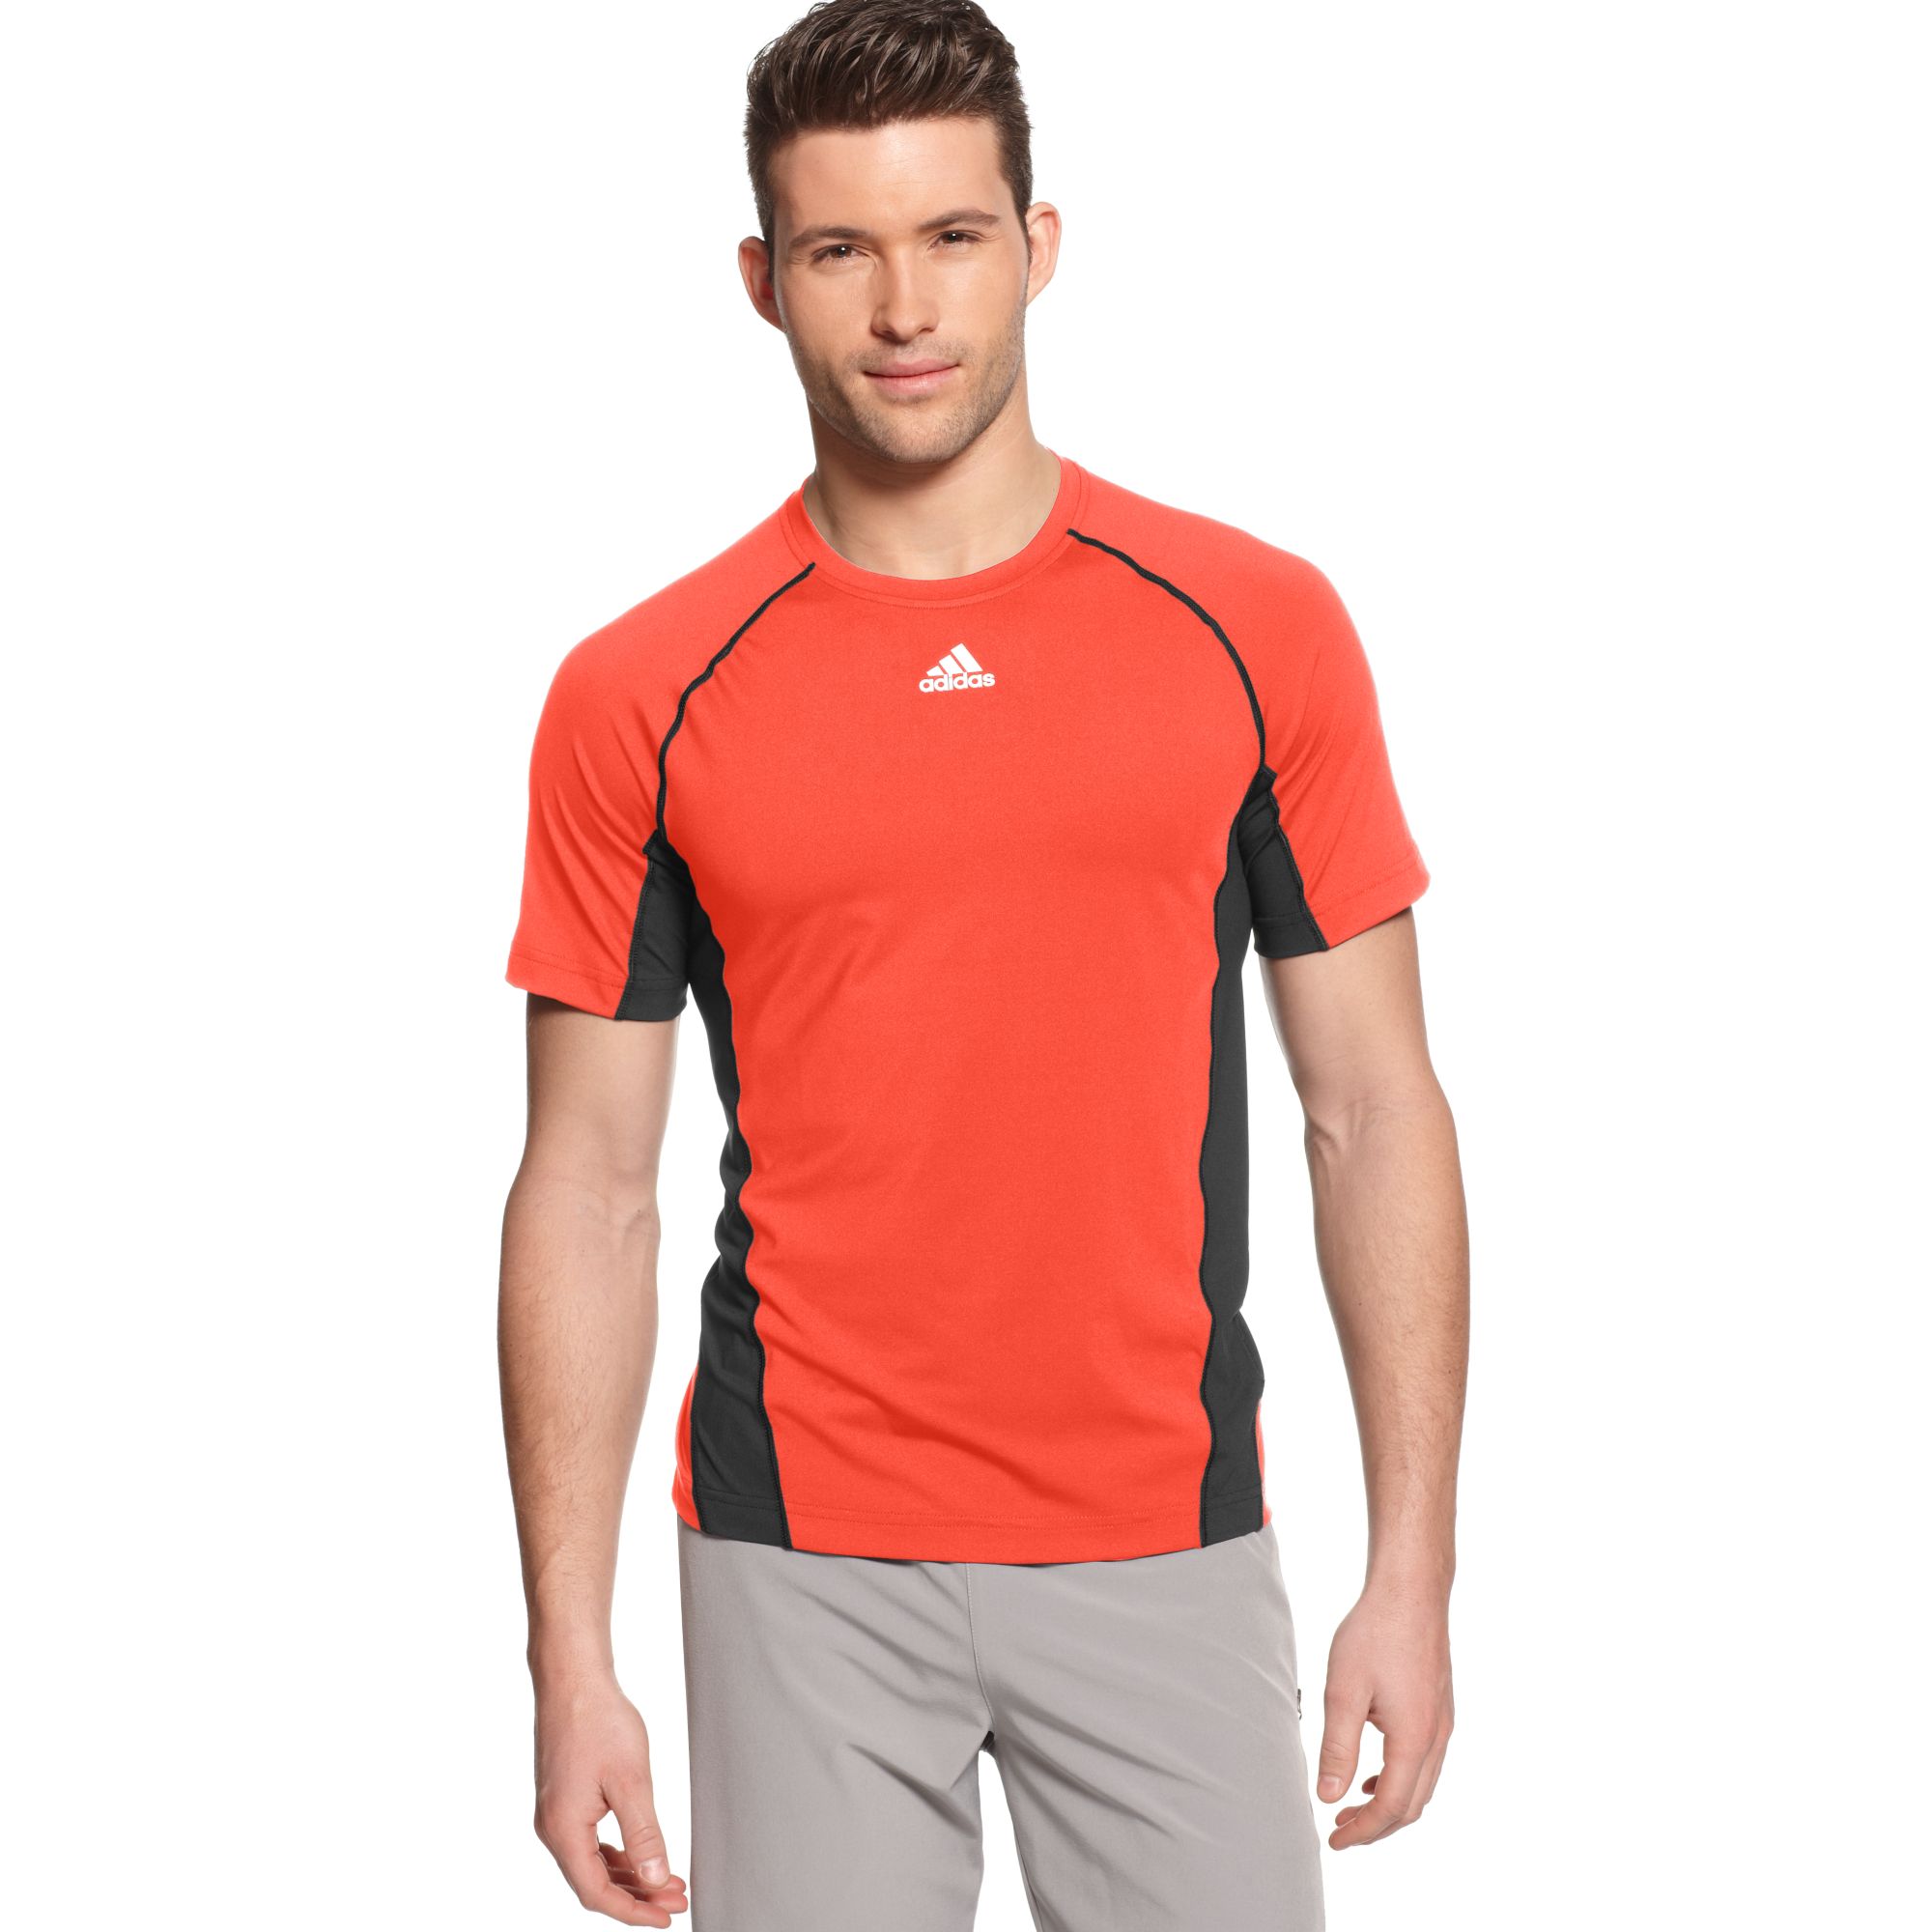 Adidas Climacool Fitted Short Sleeve Training T-shirt in Orange for Men ...